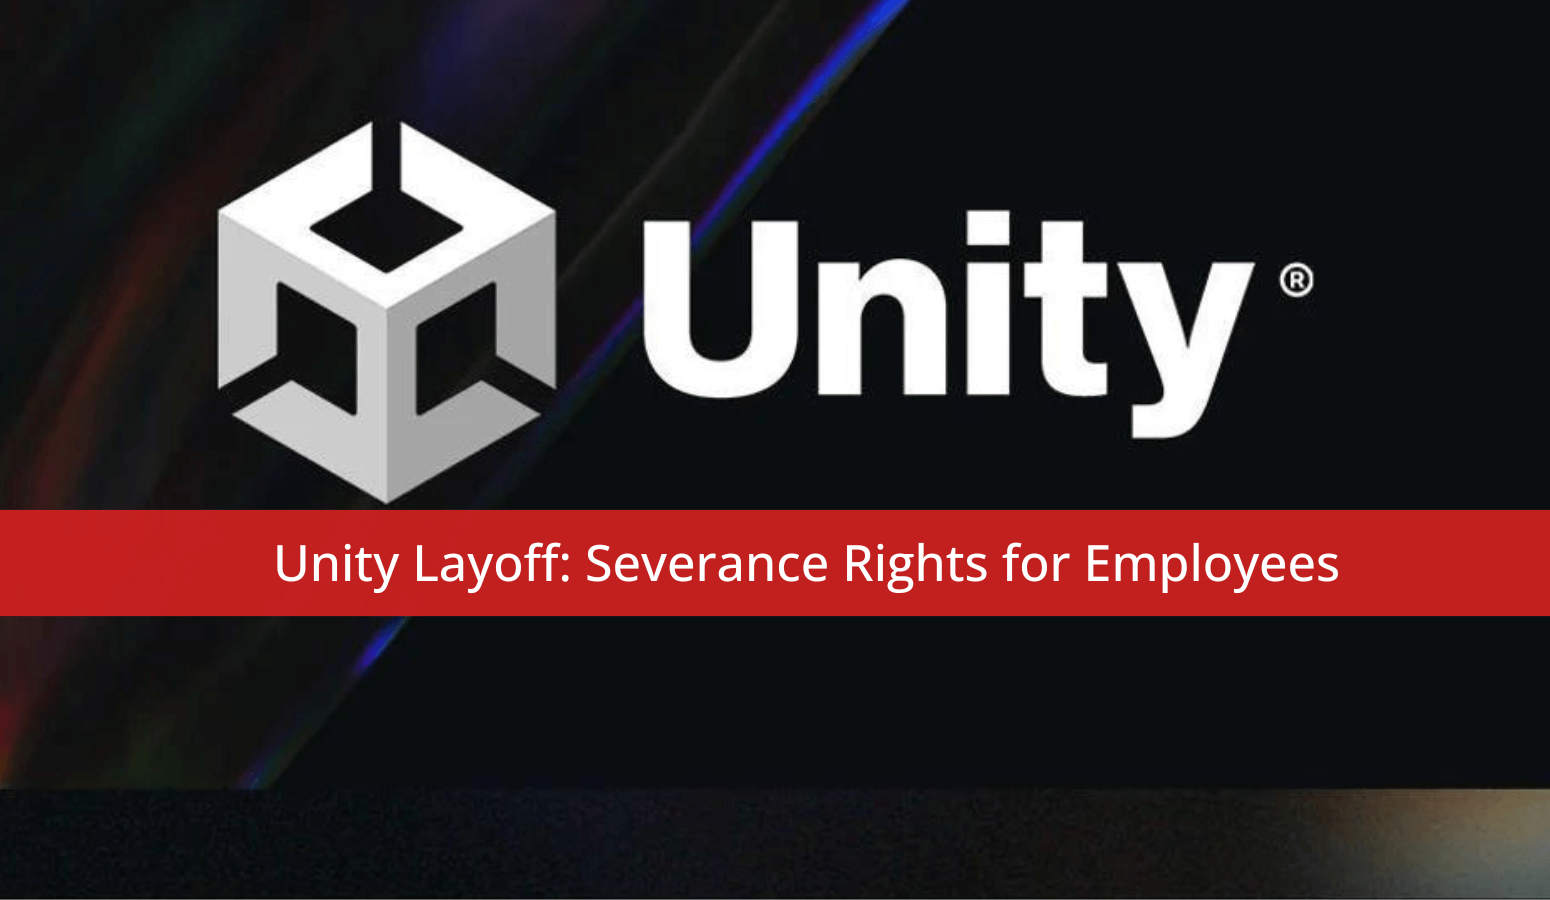 Featured image for “Unity Layoff: Severance Rights for Employees”